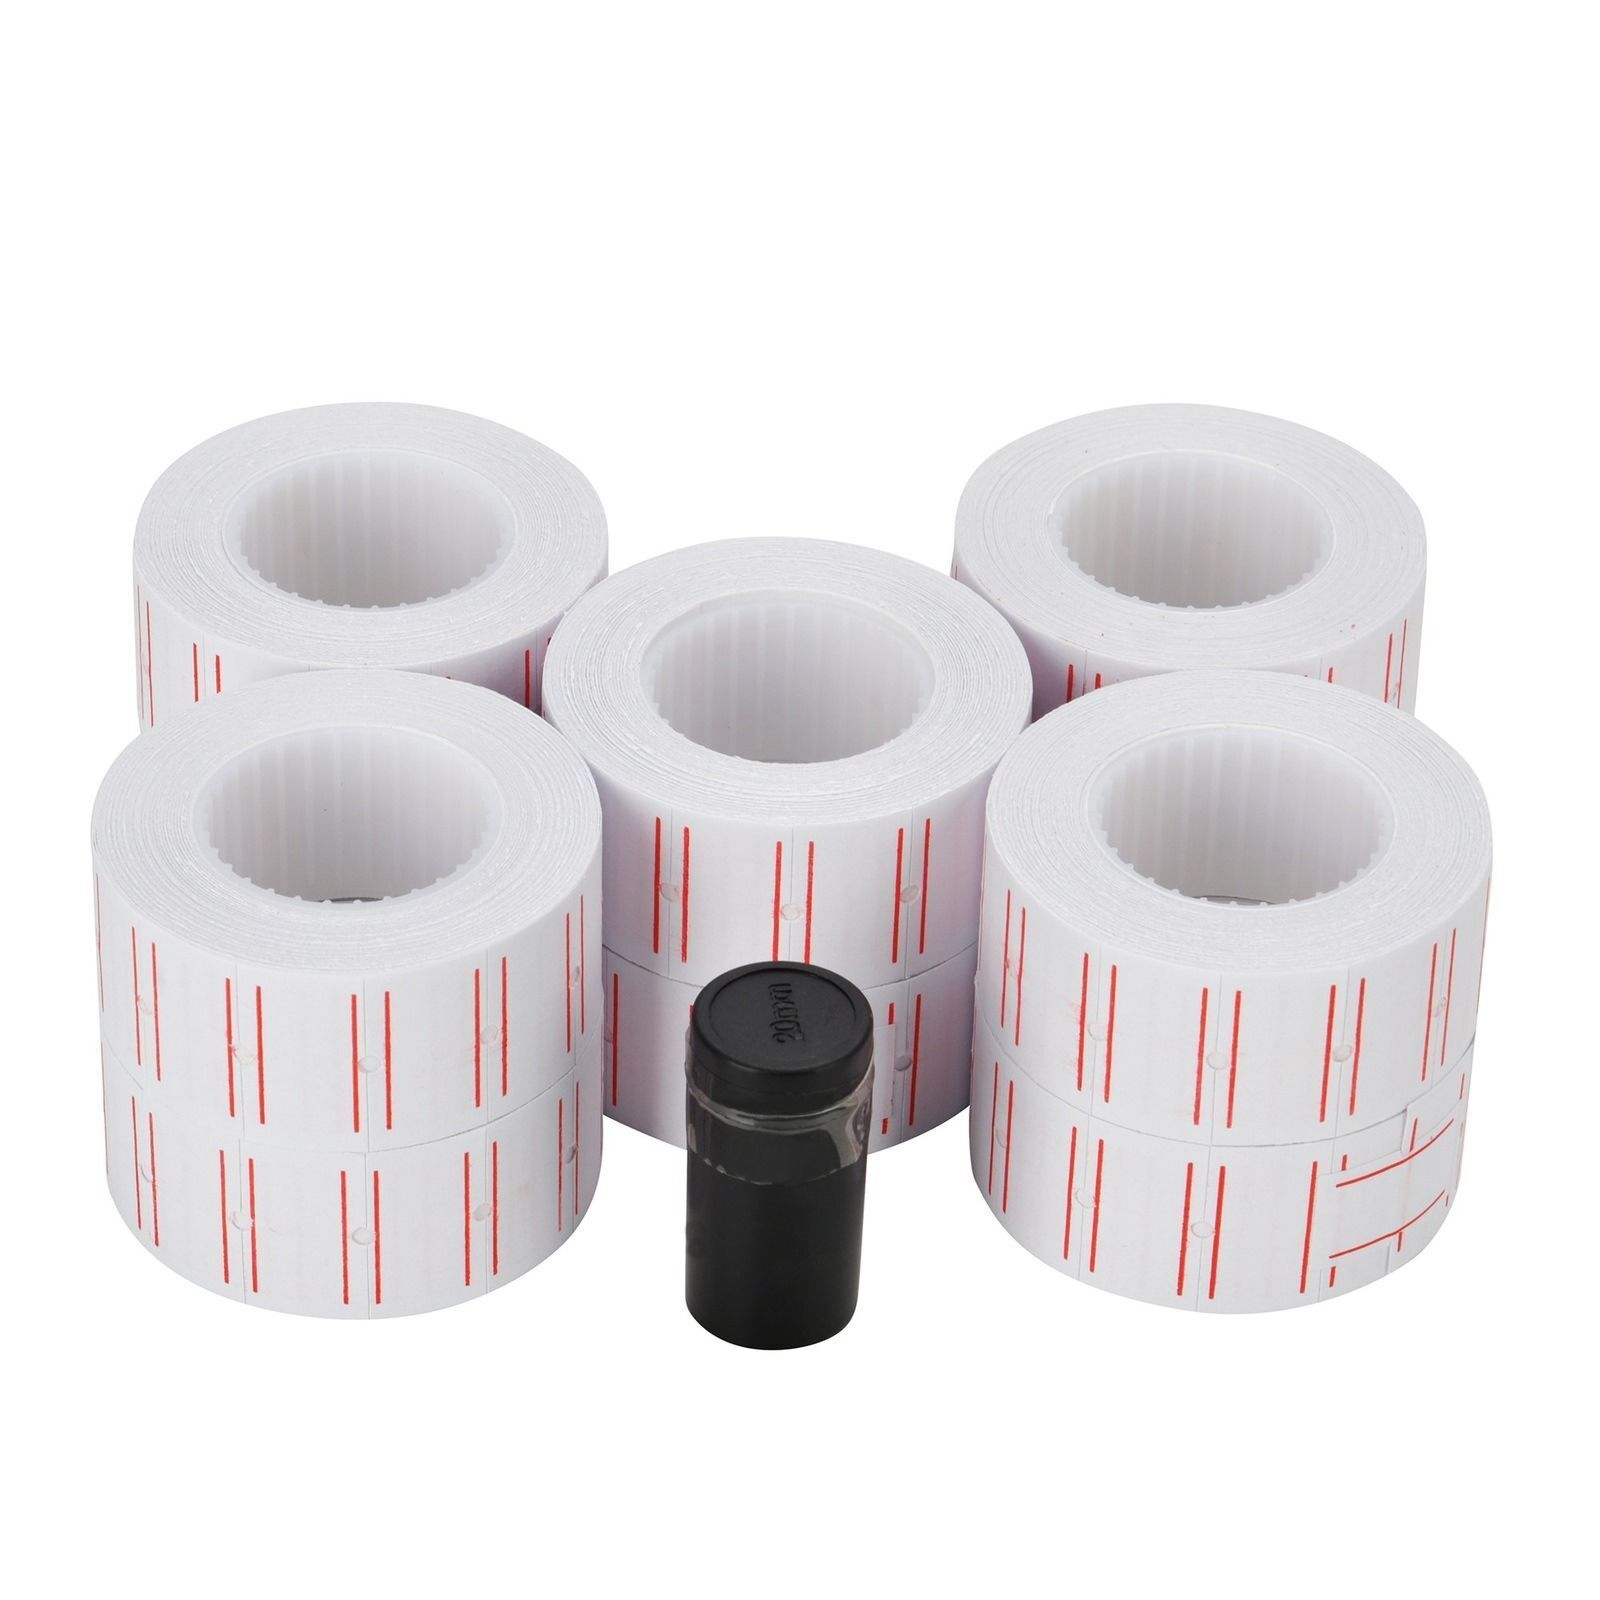 10 Rolls Price Tags Gun Labels 6000 Stickers For MX-5500 With Refill Ink Unbranded Does Not Apply - фотография #2